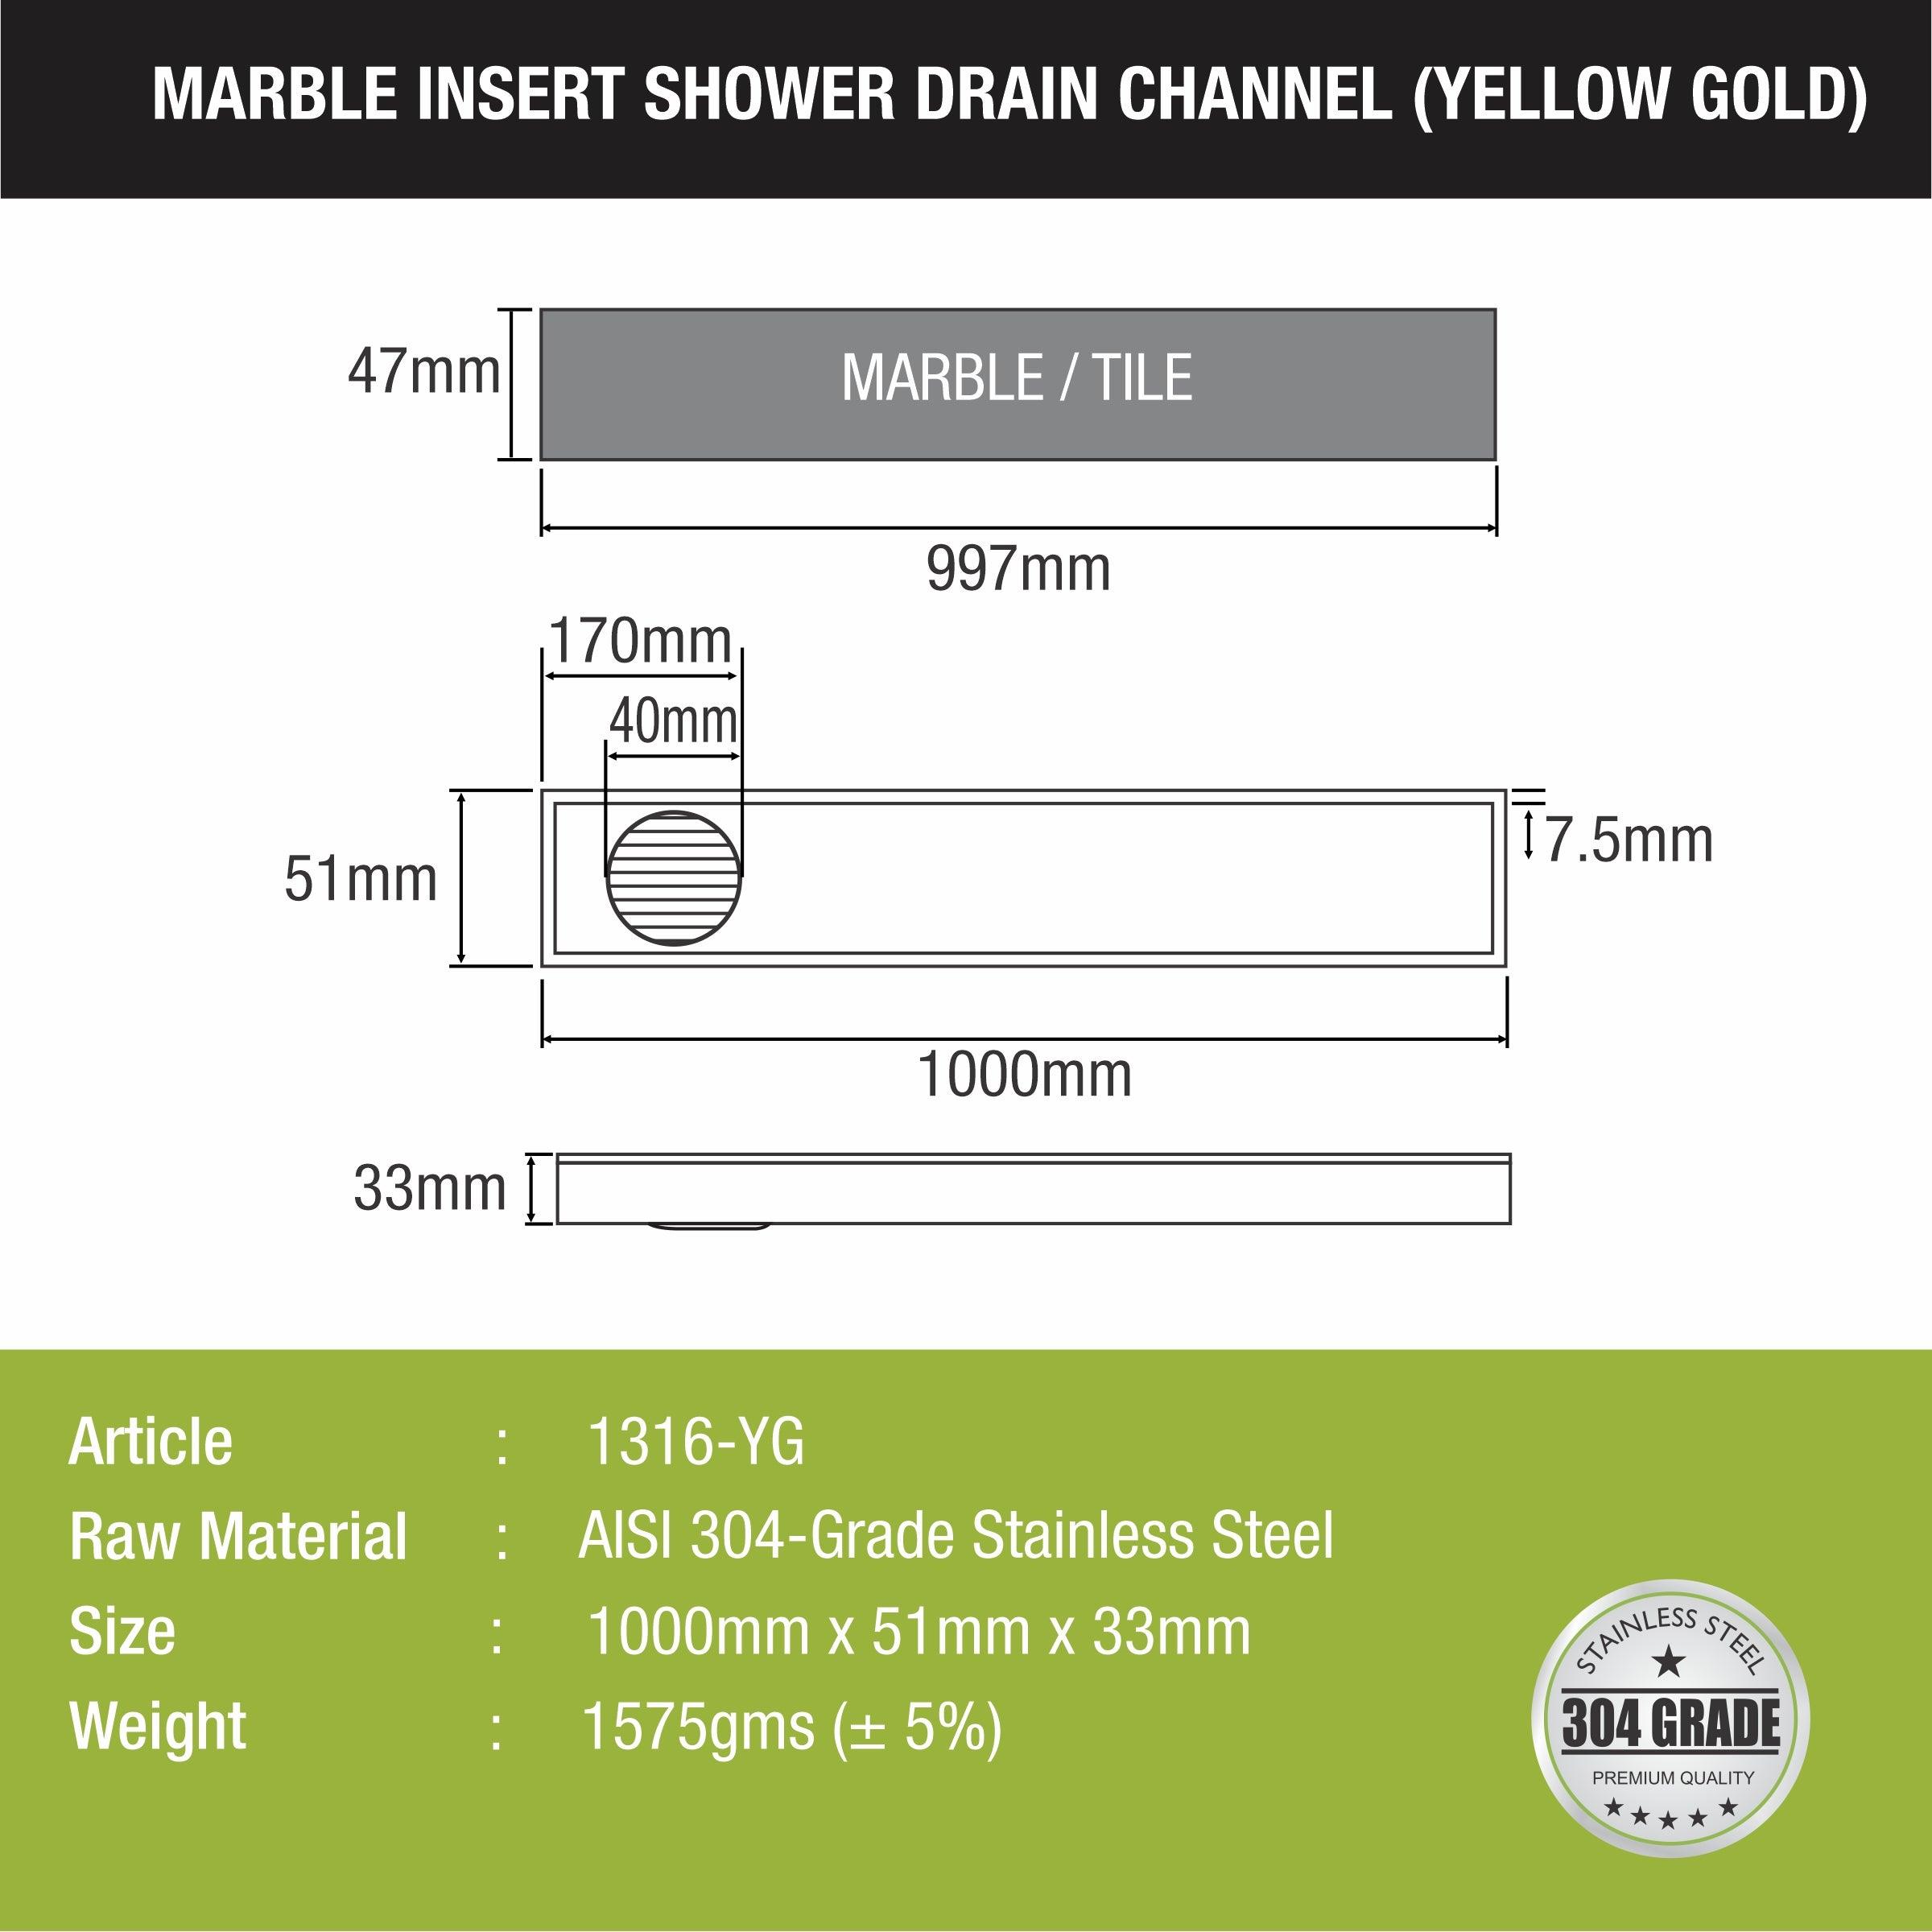 Marble Insert Shower Drain Channel - Yellow Gold (40 x 2 Inches) sizes and dimensions